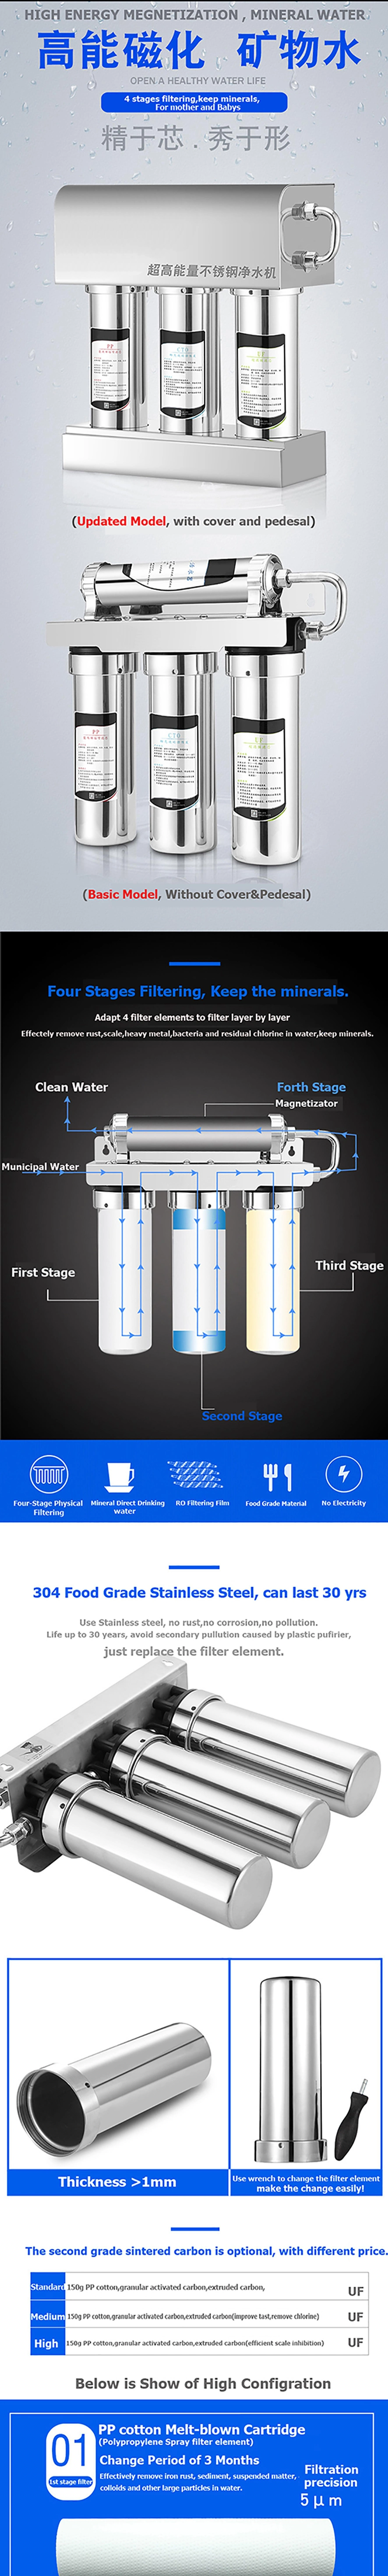 Drinking Water Tap Water Filter Drinking Water Purifier Treatment Equipment